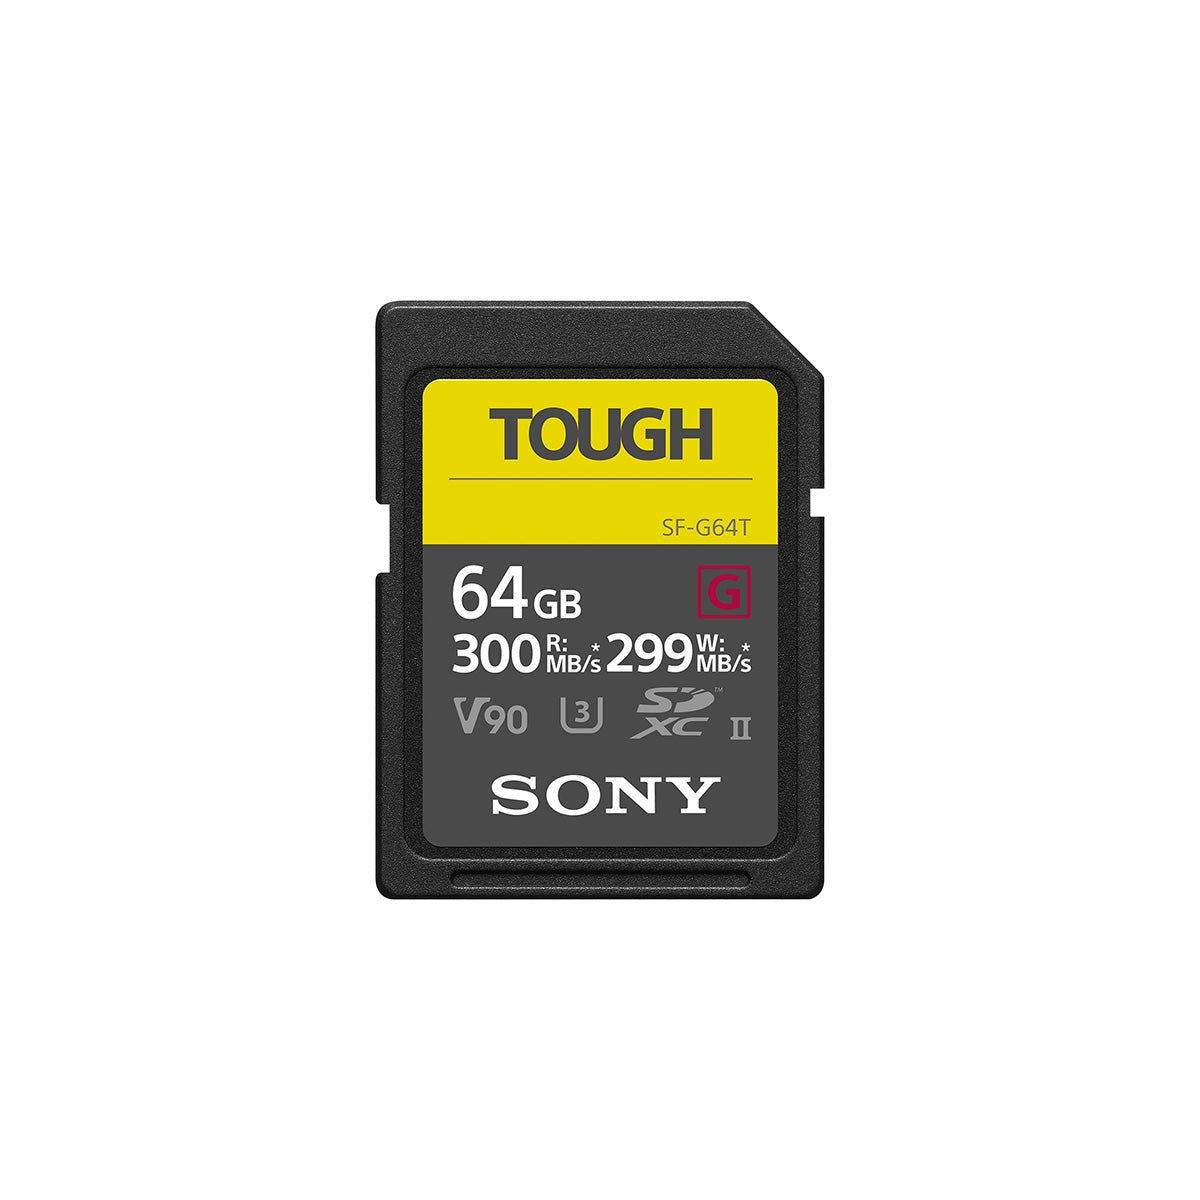 SONY SF-G 系列 TOUGH SD Card 記憶卡 Microworks Online Store